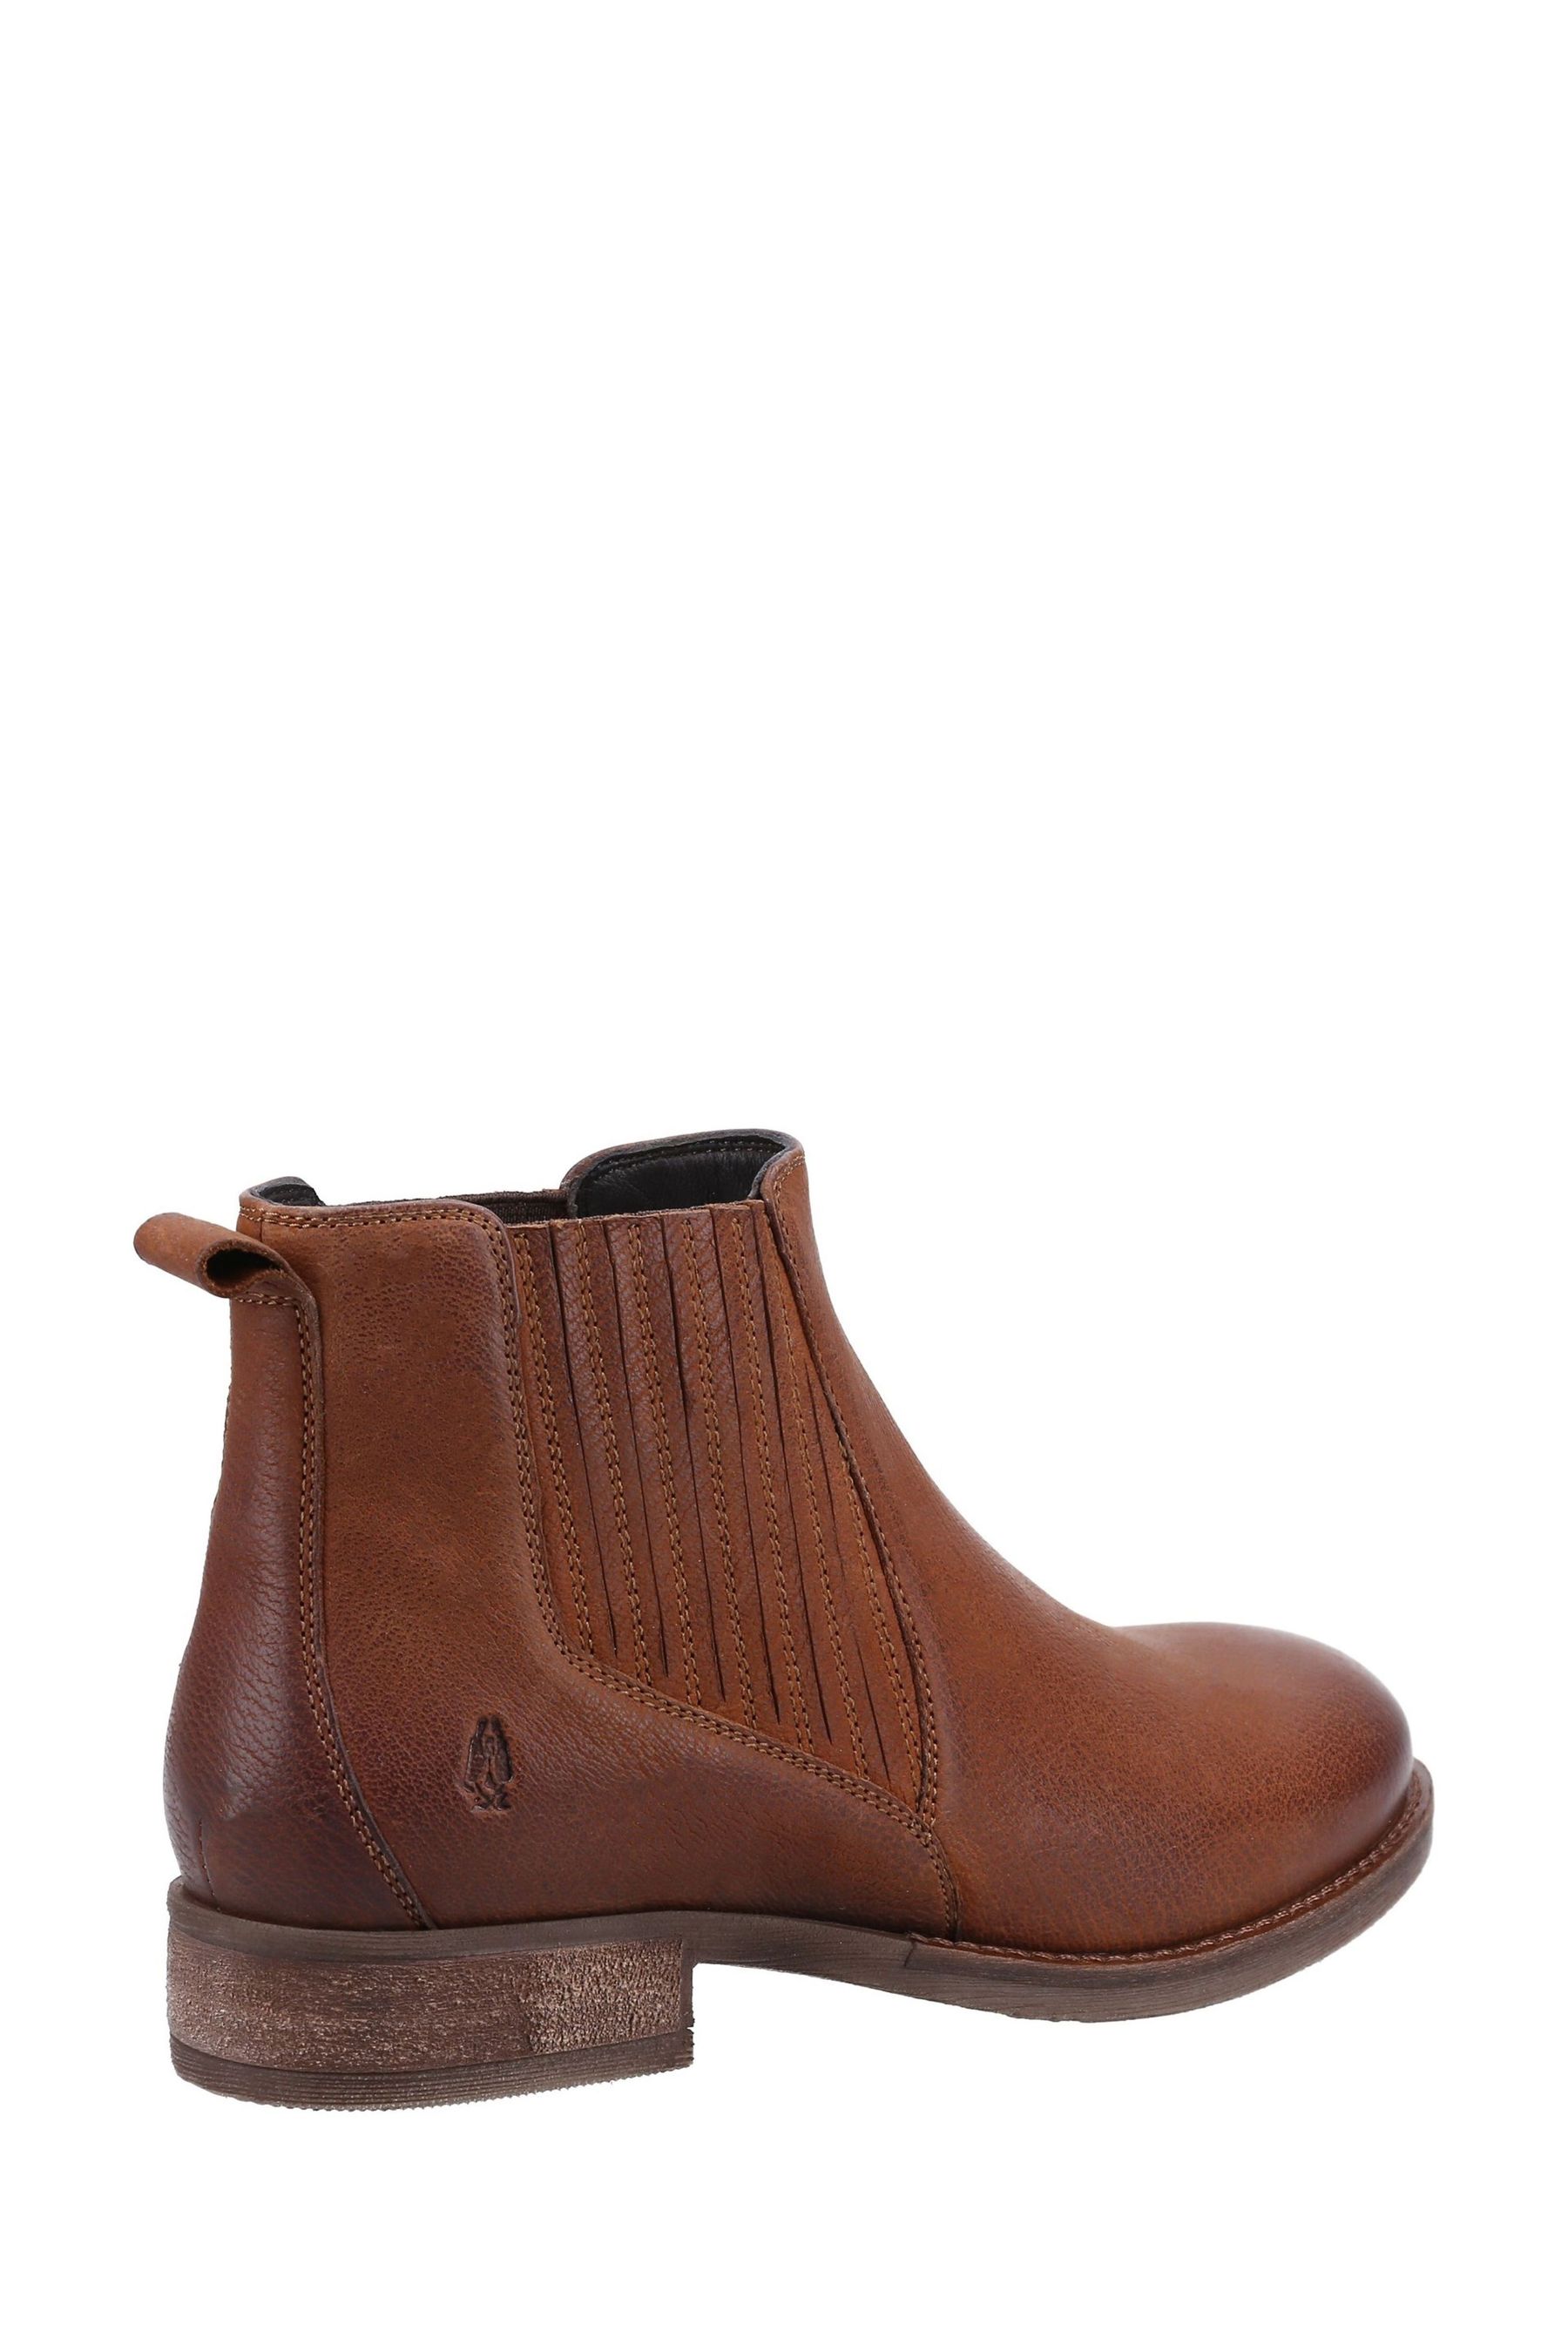 Buy Hush Puppies Edith Boots from the Next UK online shop